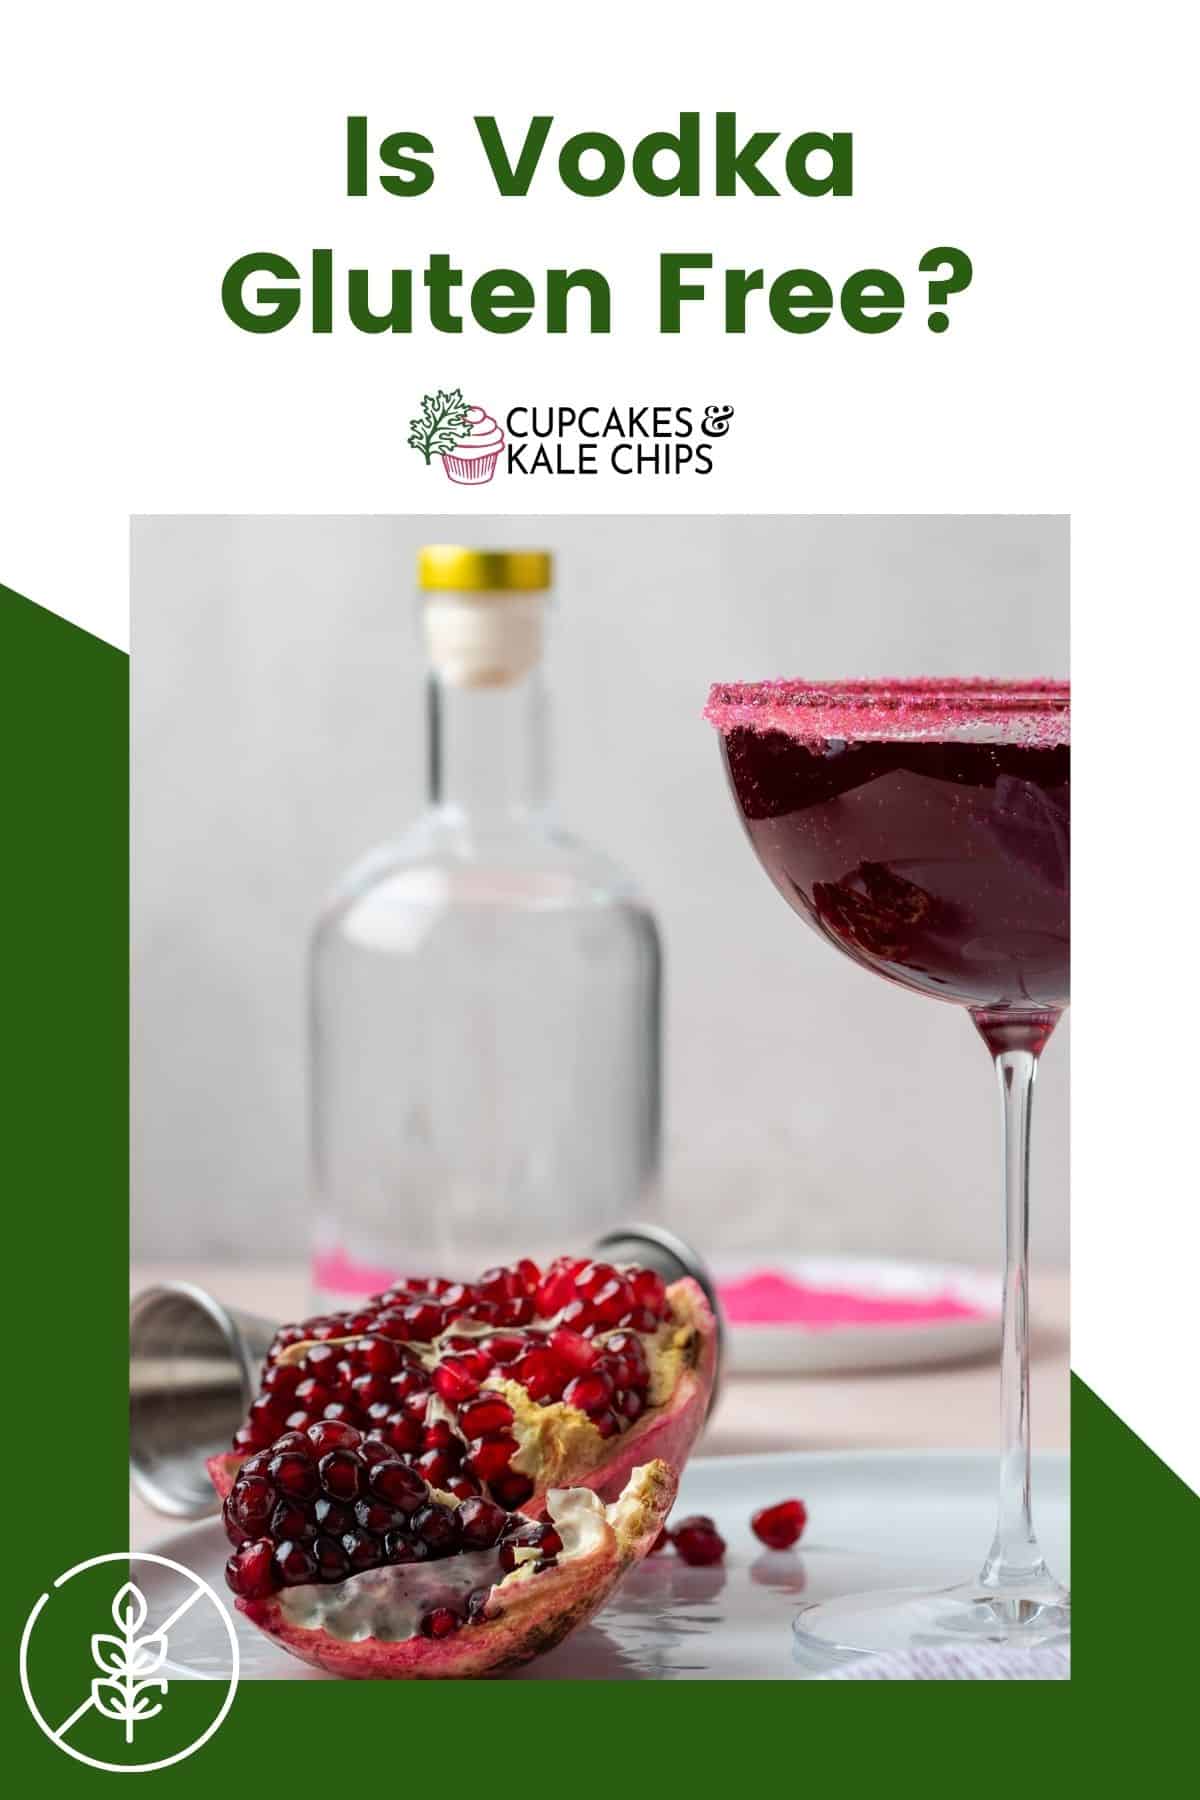 Two purple cocktails with a pomegranate and a bottle of vodka in the background with text overlay that says "Is Vodka Gluten Free?".